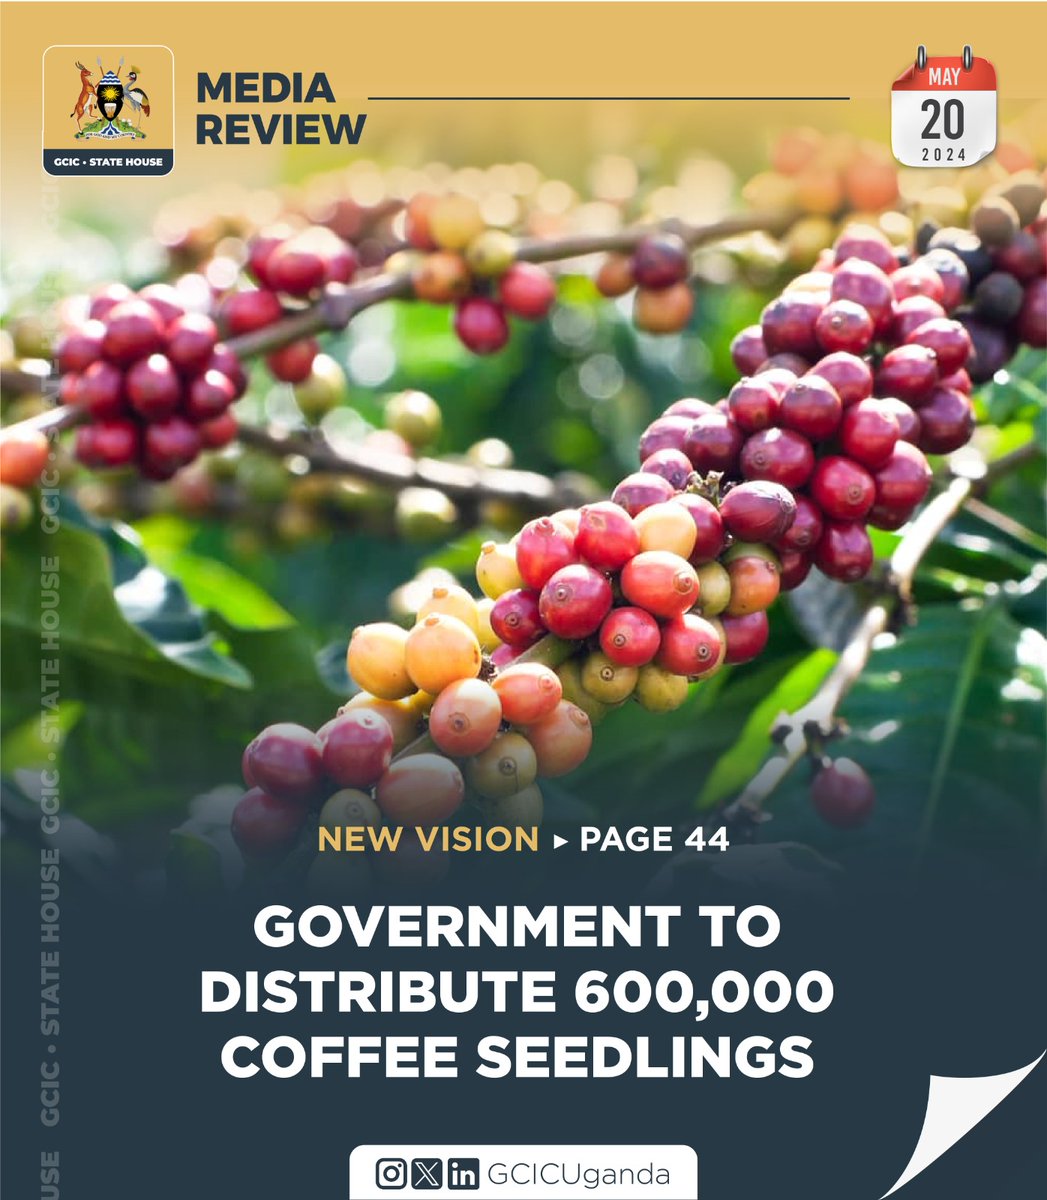 The Government, through the agriculture ministry, plans to distribute 600,000 coffee seedlings to farmers in Lango and Acholi sub-regions. Link:media.gcic.go.ug/gcic-media-rev…